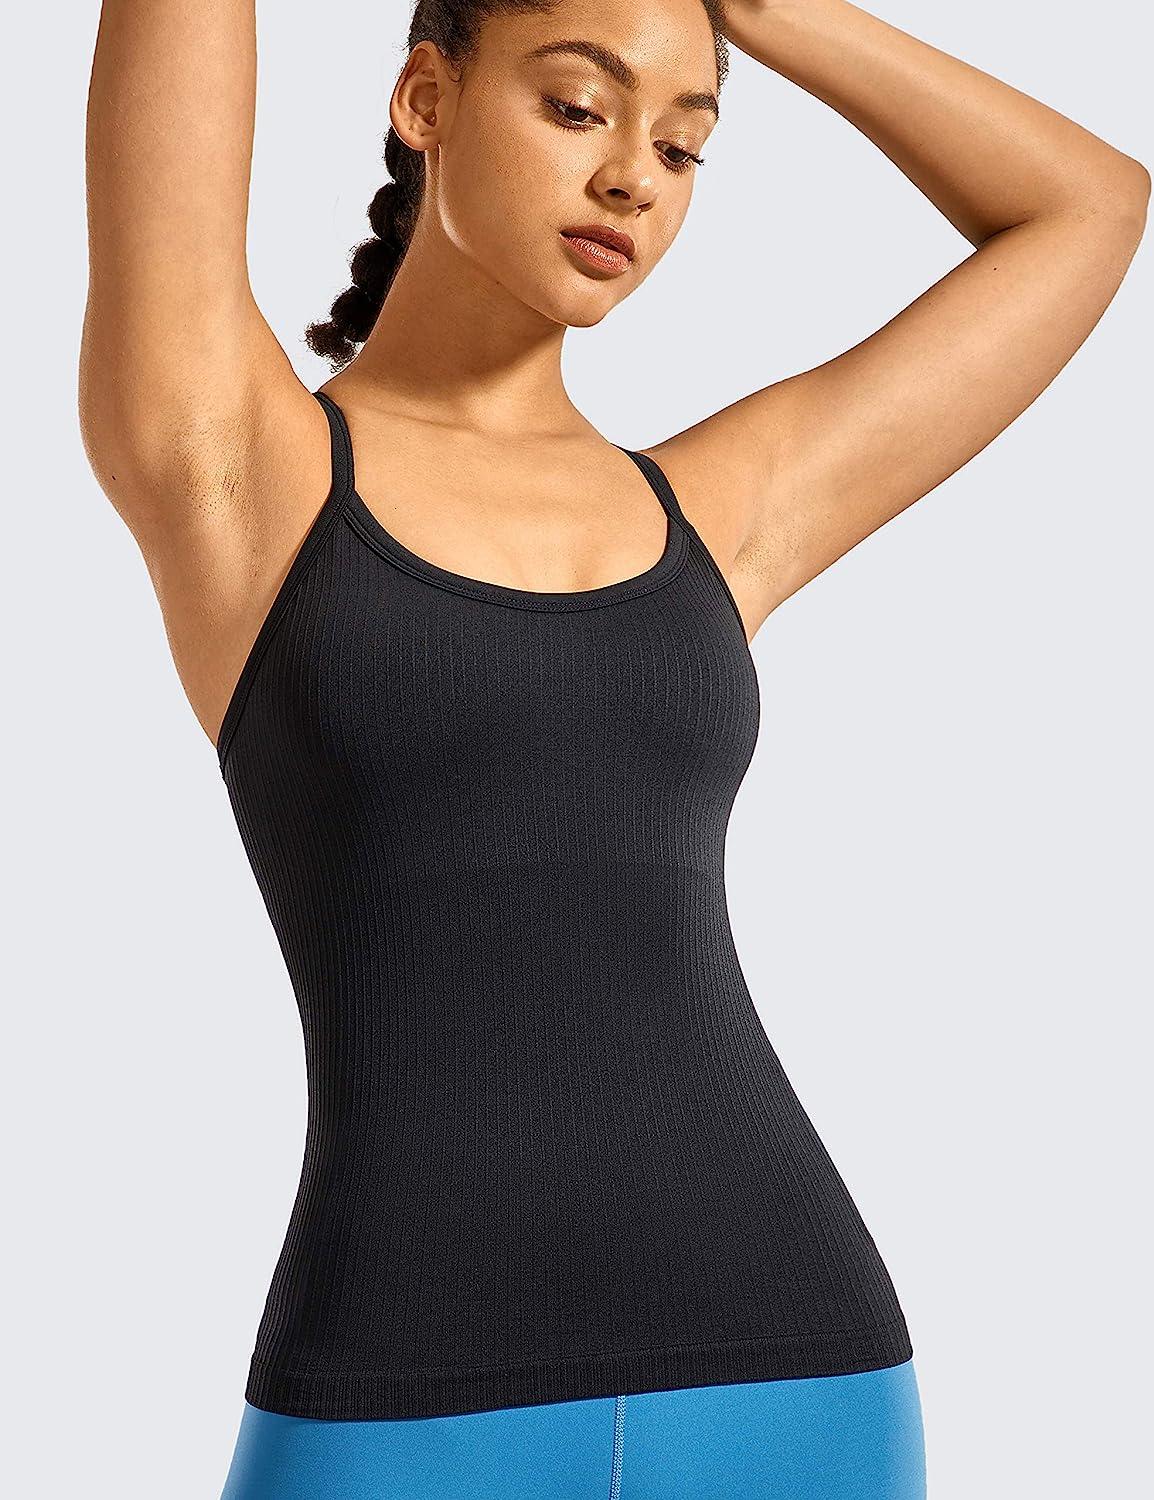 Women Black Tank Top Ribbed Racer Back One Size Stretchy Yoga A-Shirt New